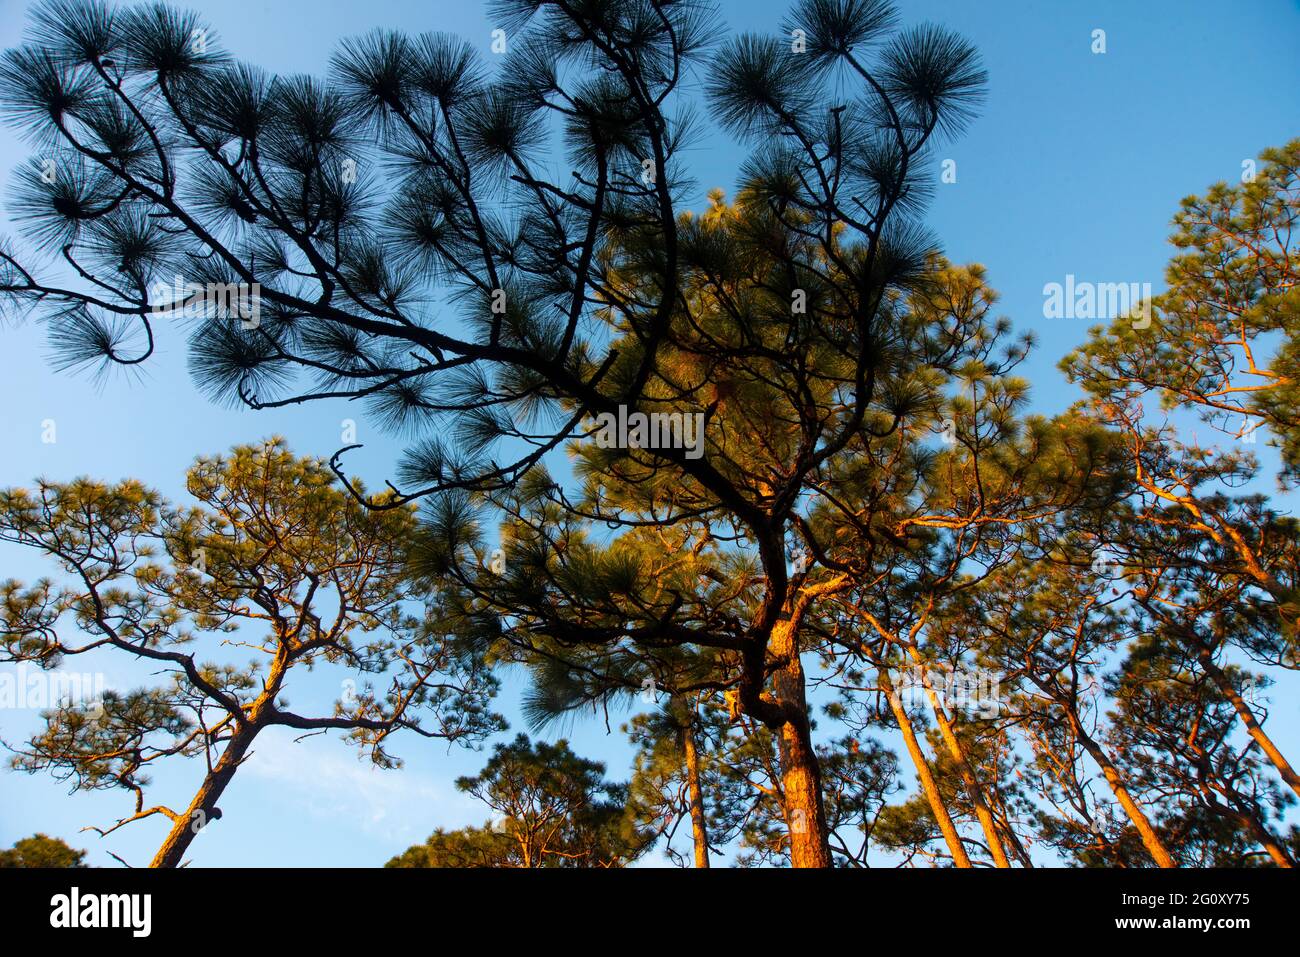 Pine trees in Fairhope, AL, USA, climb into the sky in an image taken on Nov. 1, 2020. Stock Photo